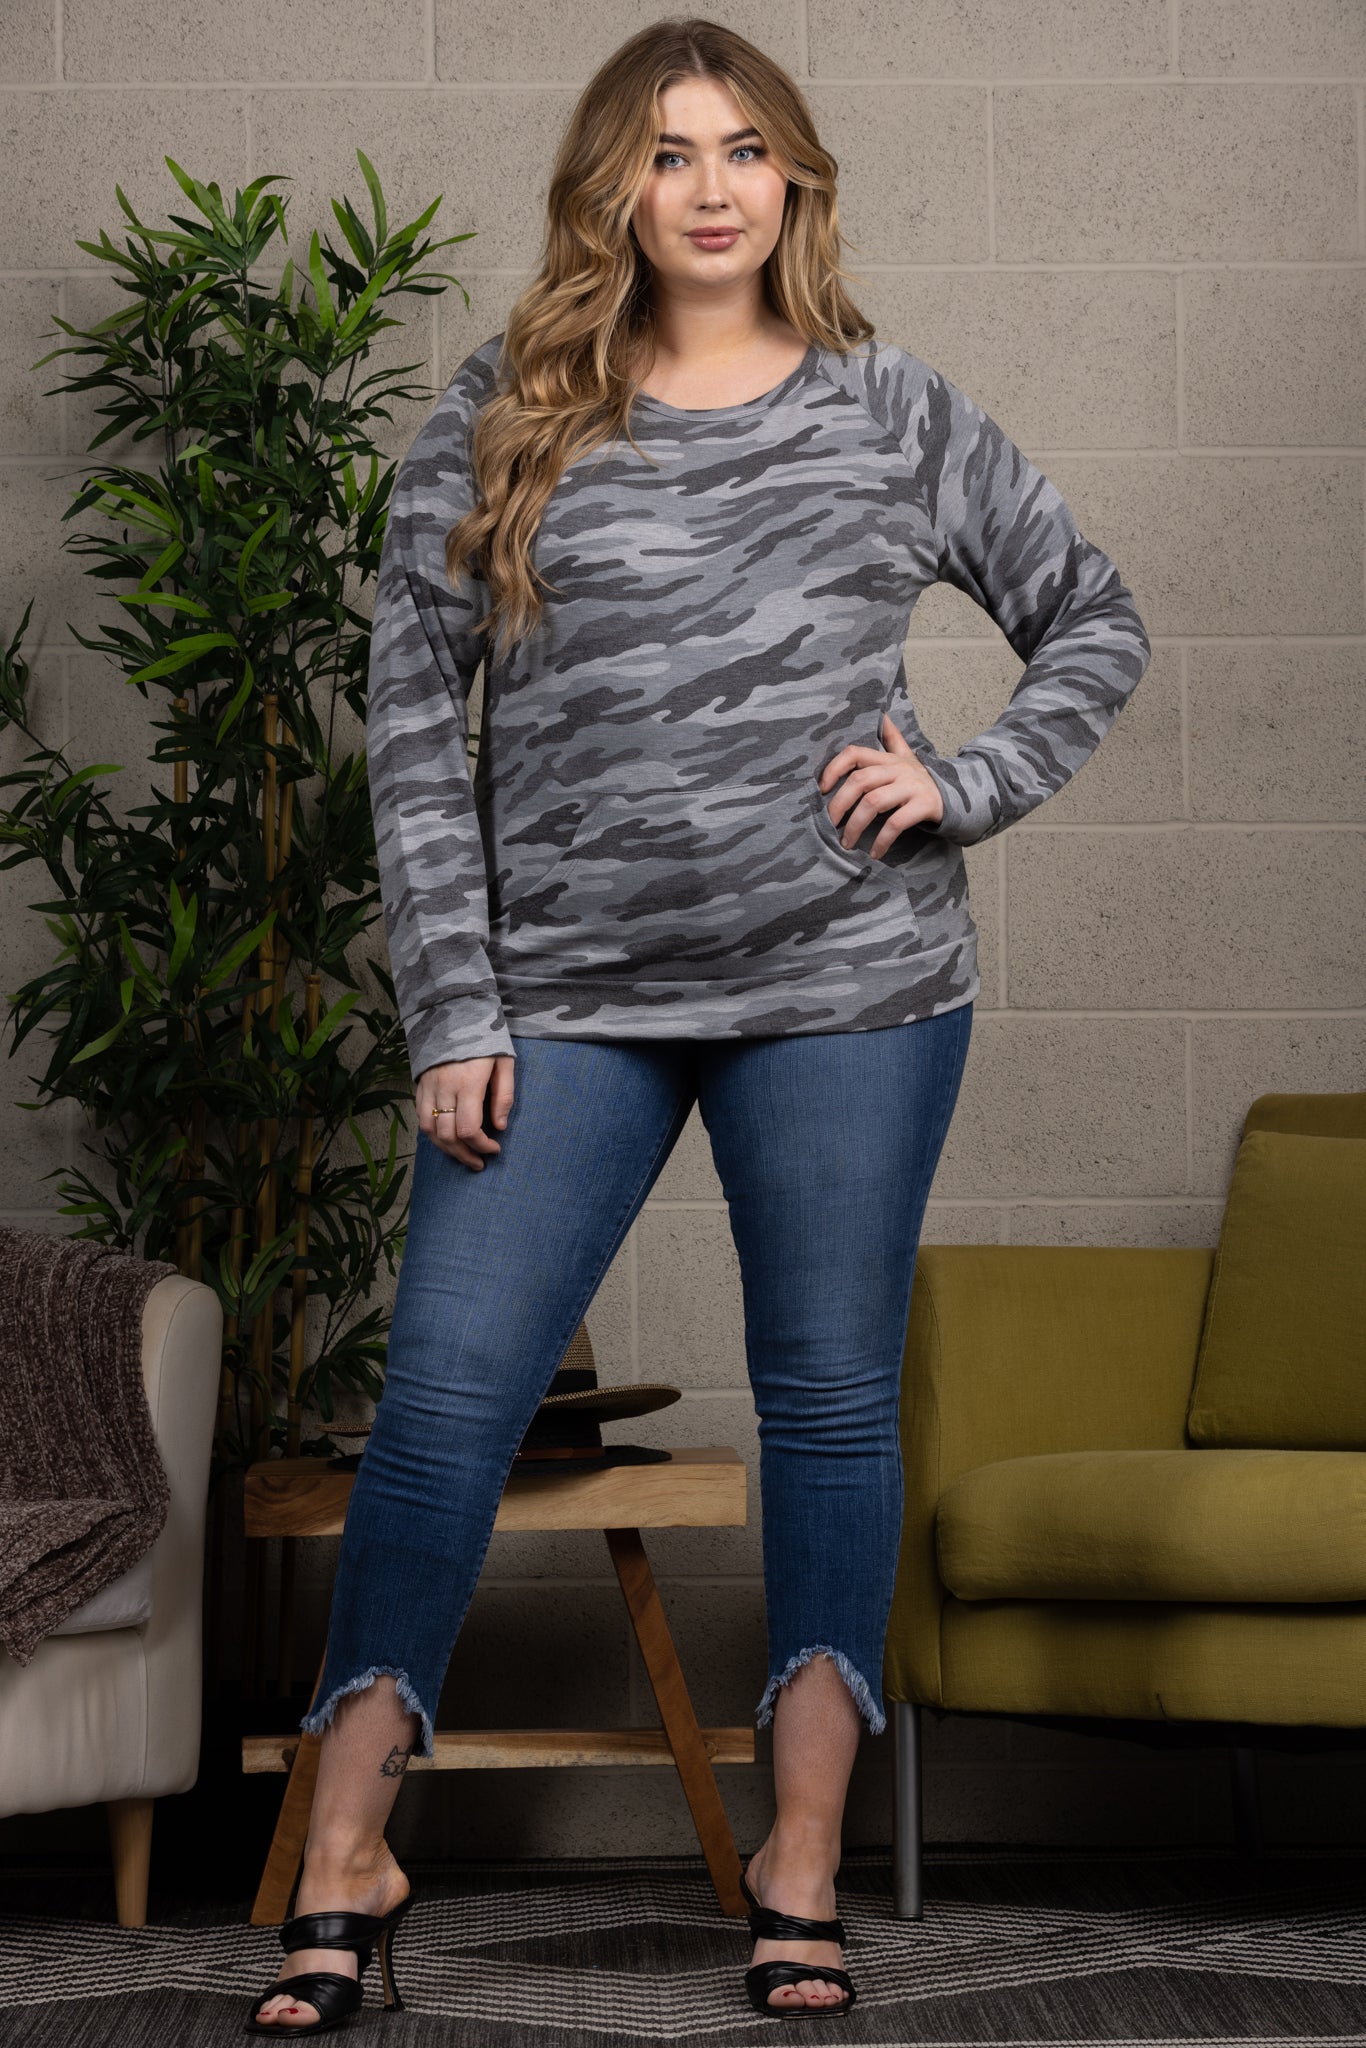 MILITARY PRINT PULLOVER PLUS SIZE TOP-T7571PLB